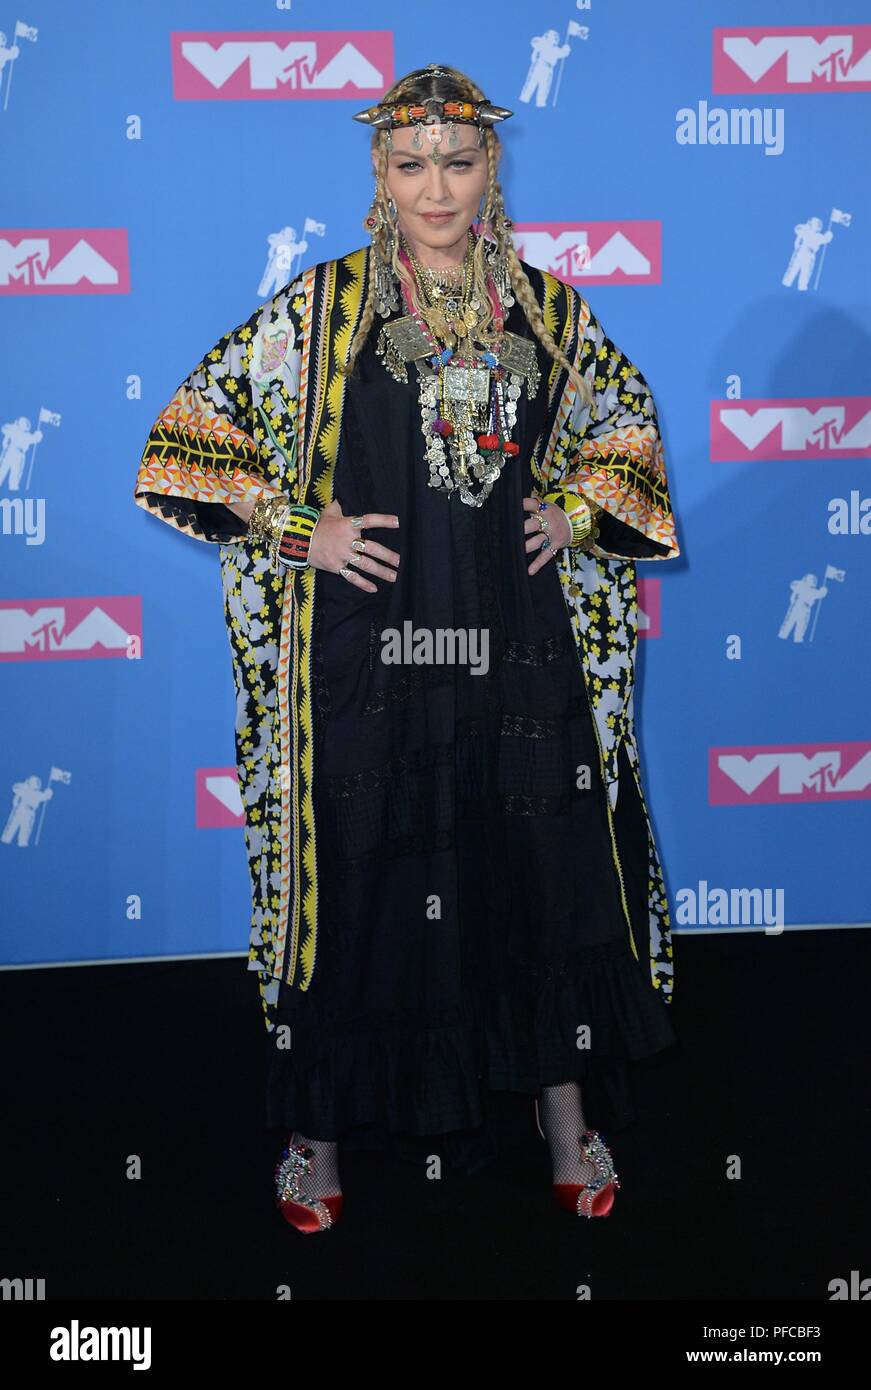 New York, NY, USA. 20th Aug, 2018. Madonna at arrivals for 2018 MTV VMAs - Arrivals Part 3, Radio City Music Hall, New York, NY August 20, 2018. Credit: Kristin Callahan/Everett Collection/Alamy Live News Stock Photo